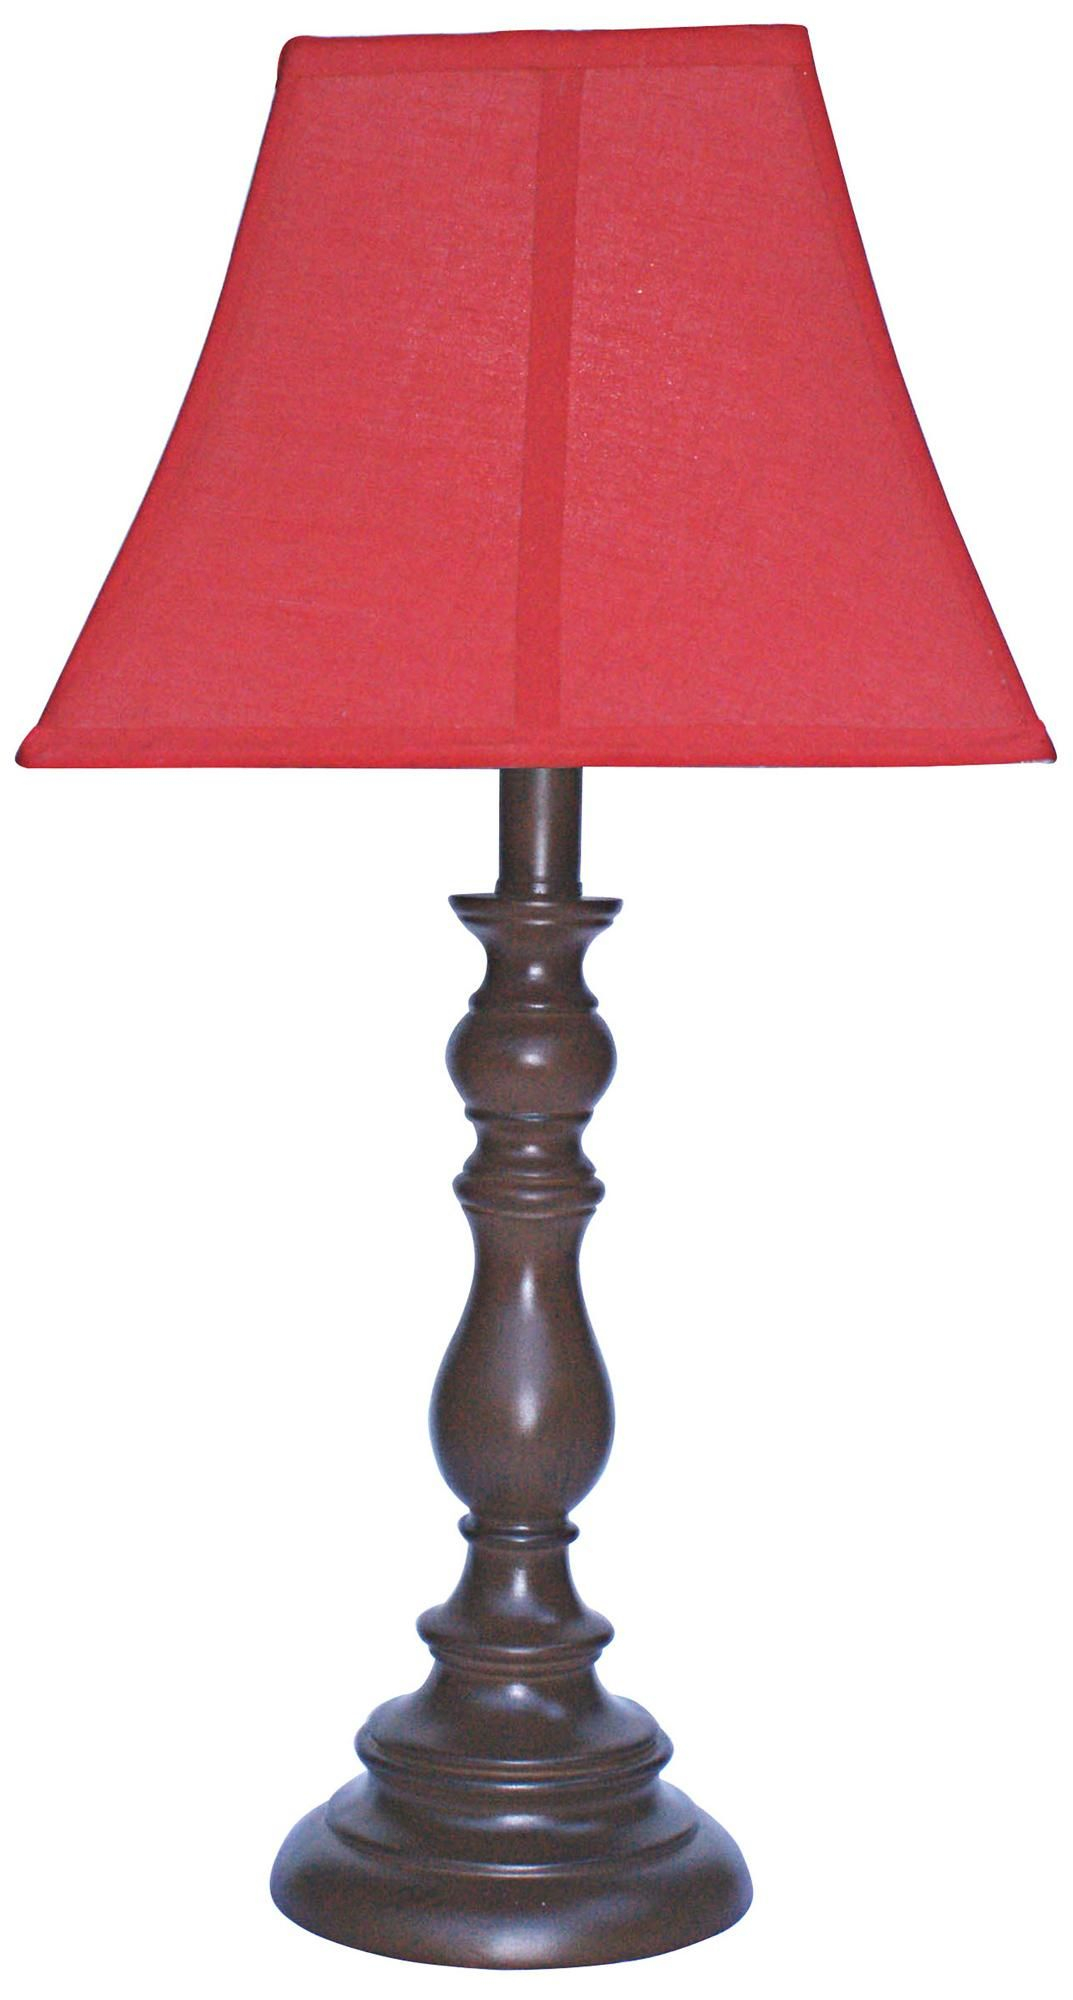 Red Shade With Brown Candlestick Base Table Lamp In 2019 with regard to dimensions 1073 X 2000